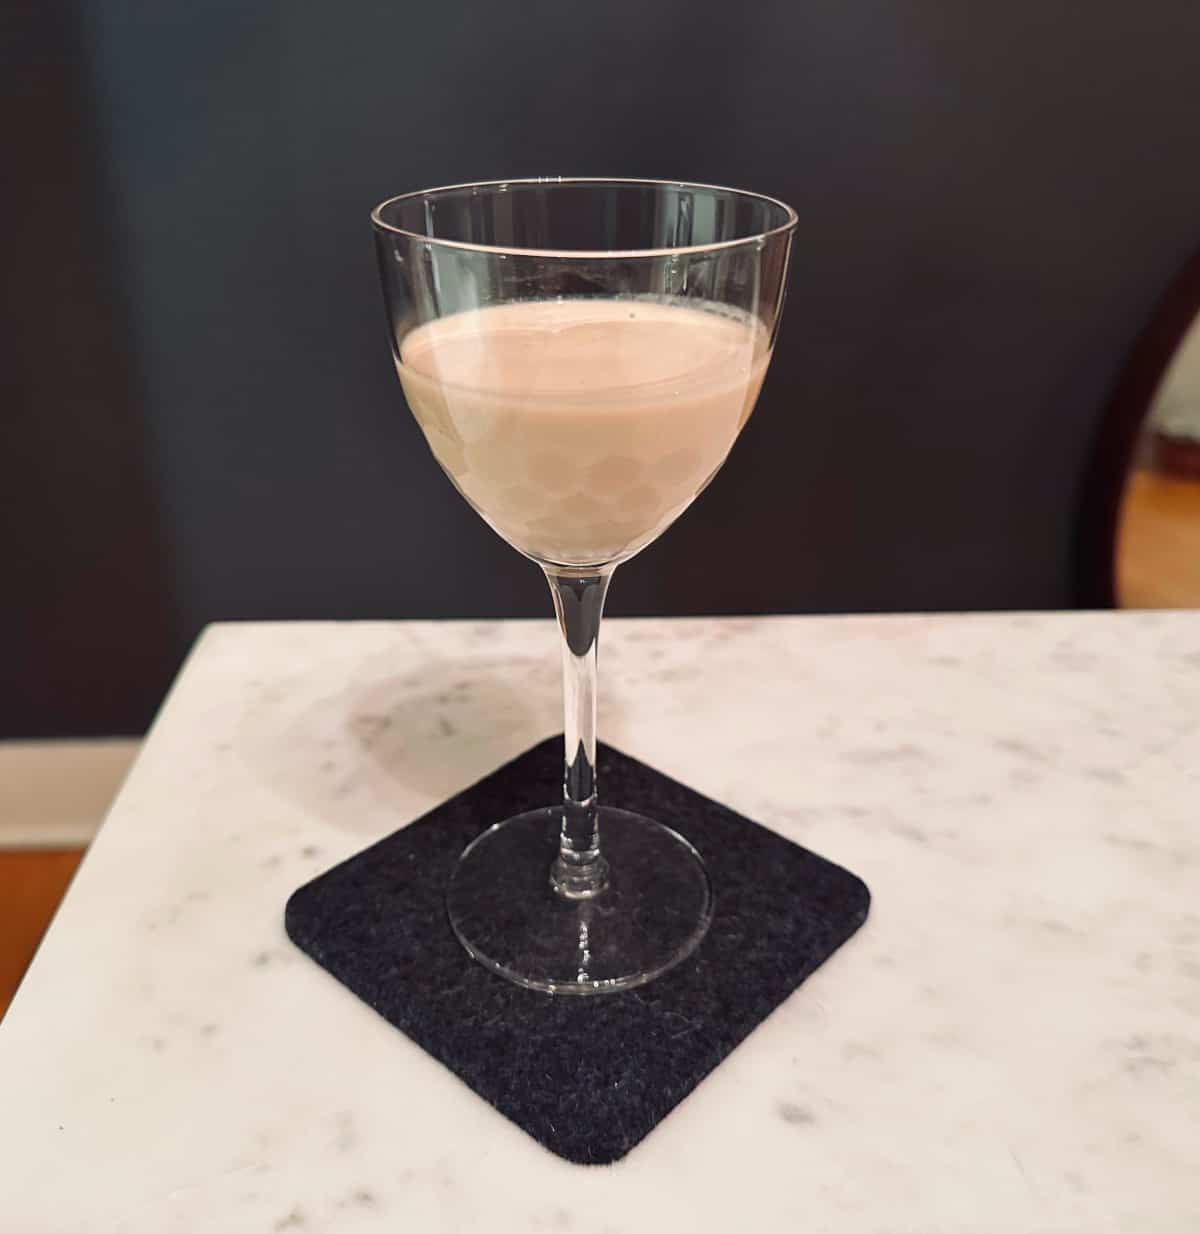 Irish cream in a small stemmed glass sitting on a dark gray coaster on a white marble table.